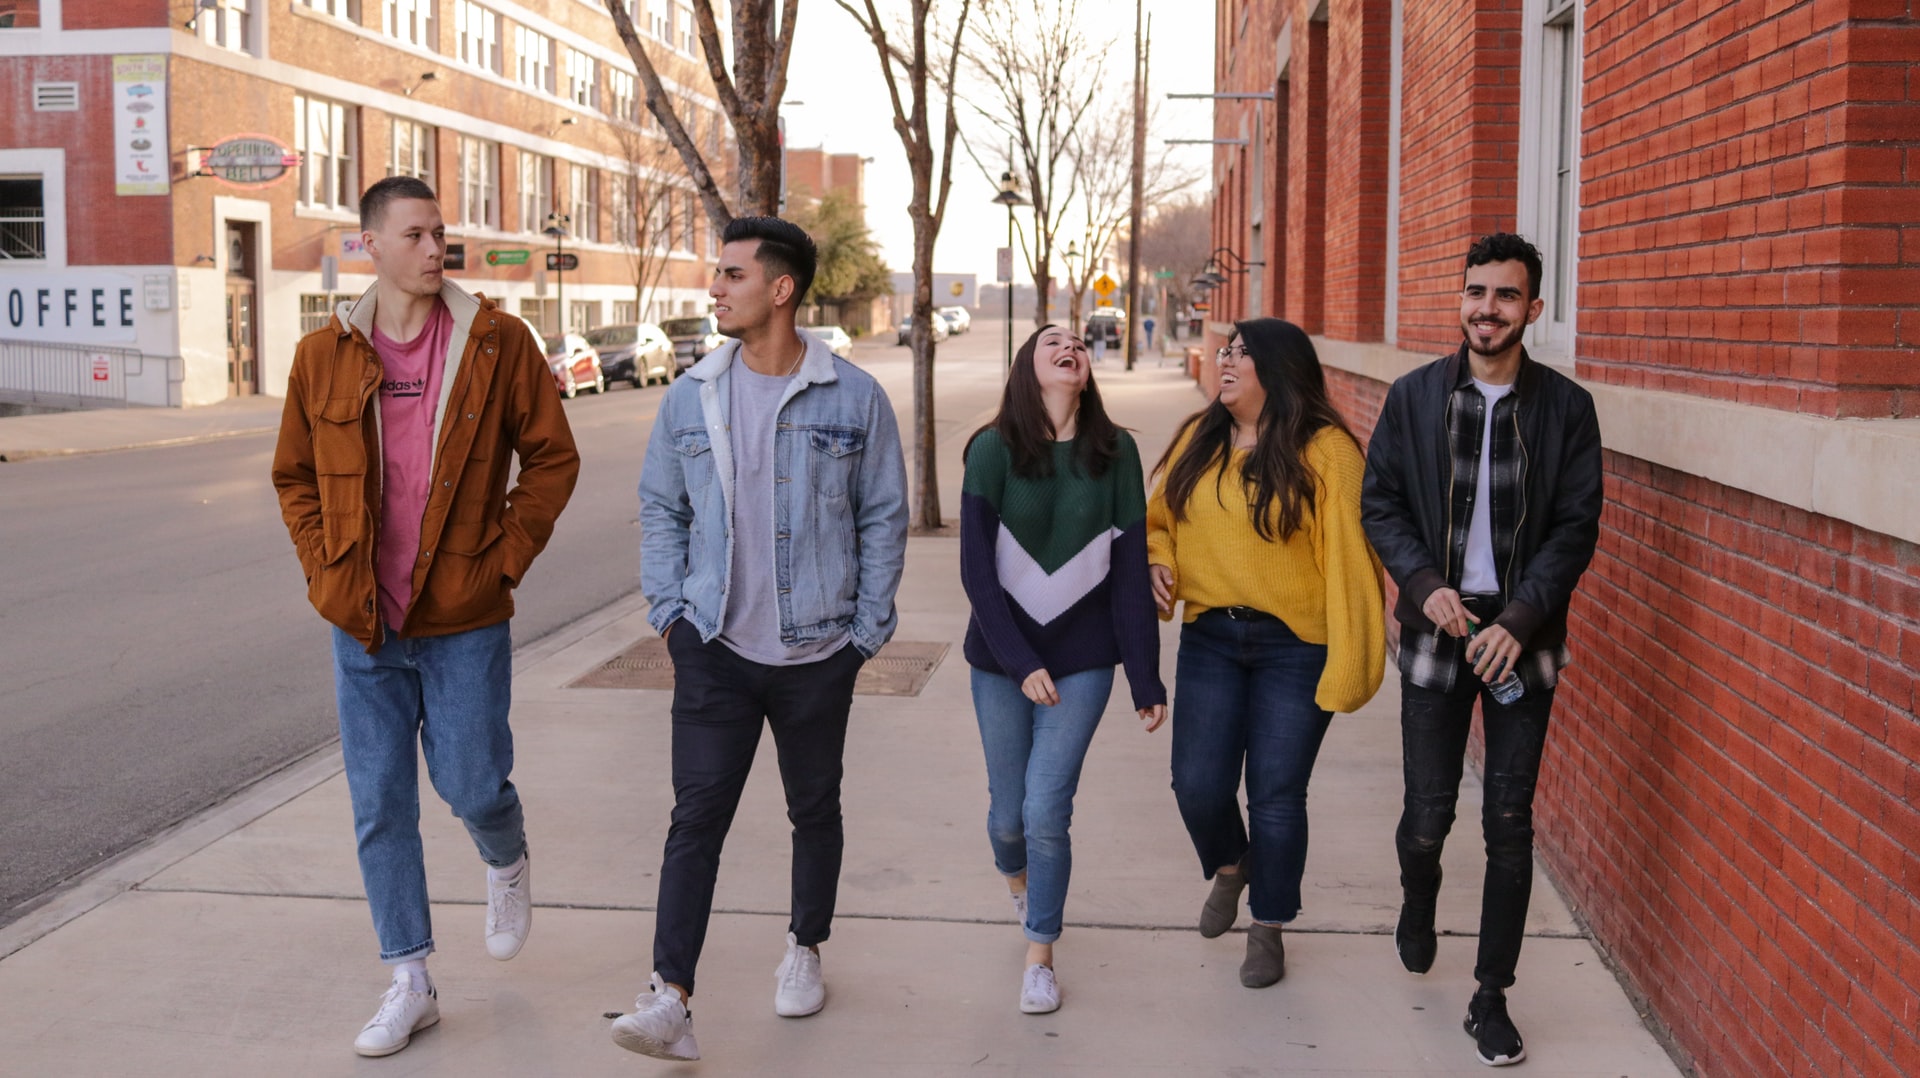 Group of young adults walking down the sidewalk together.